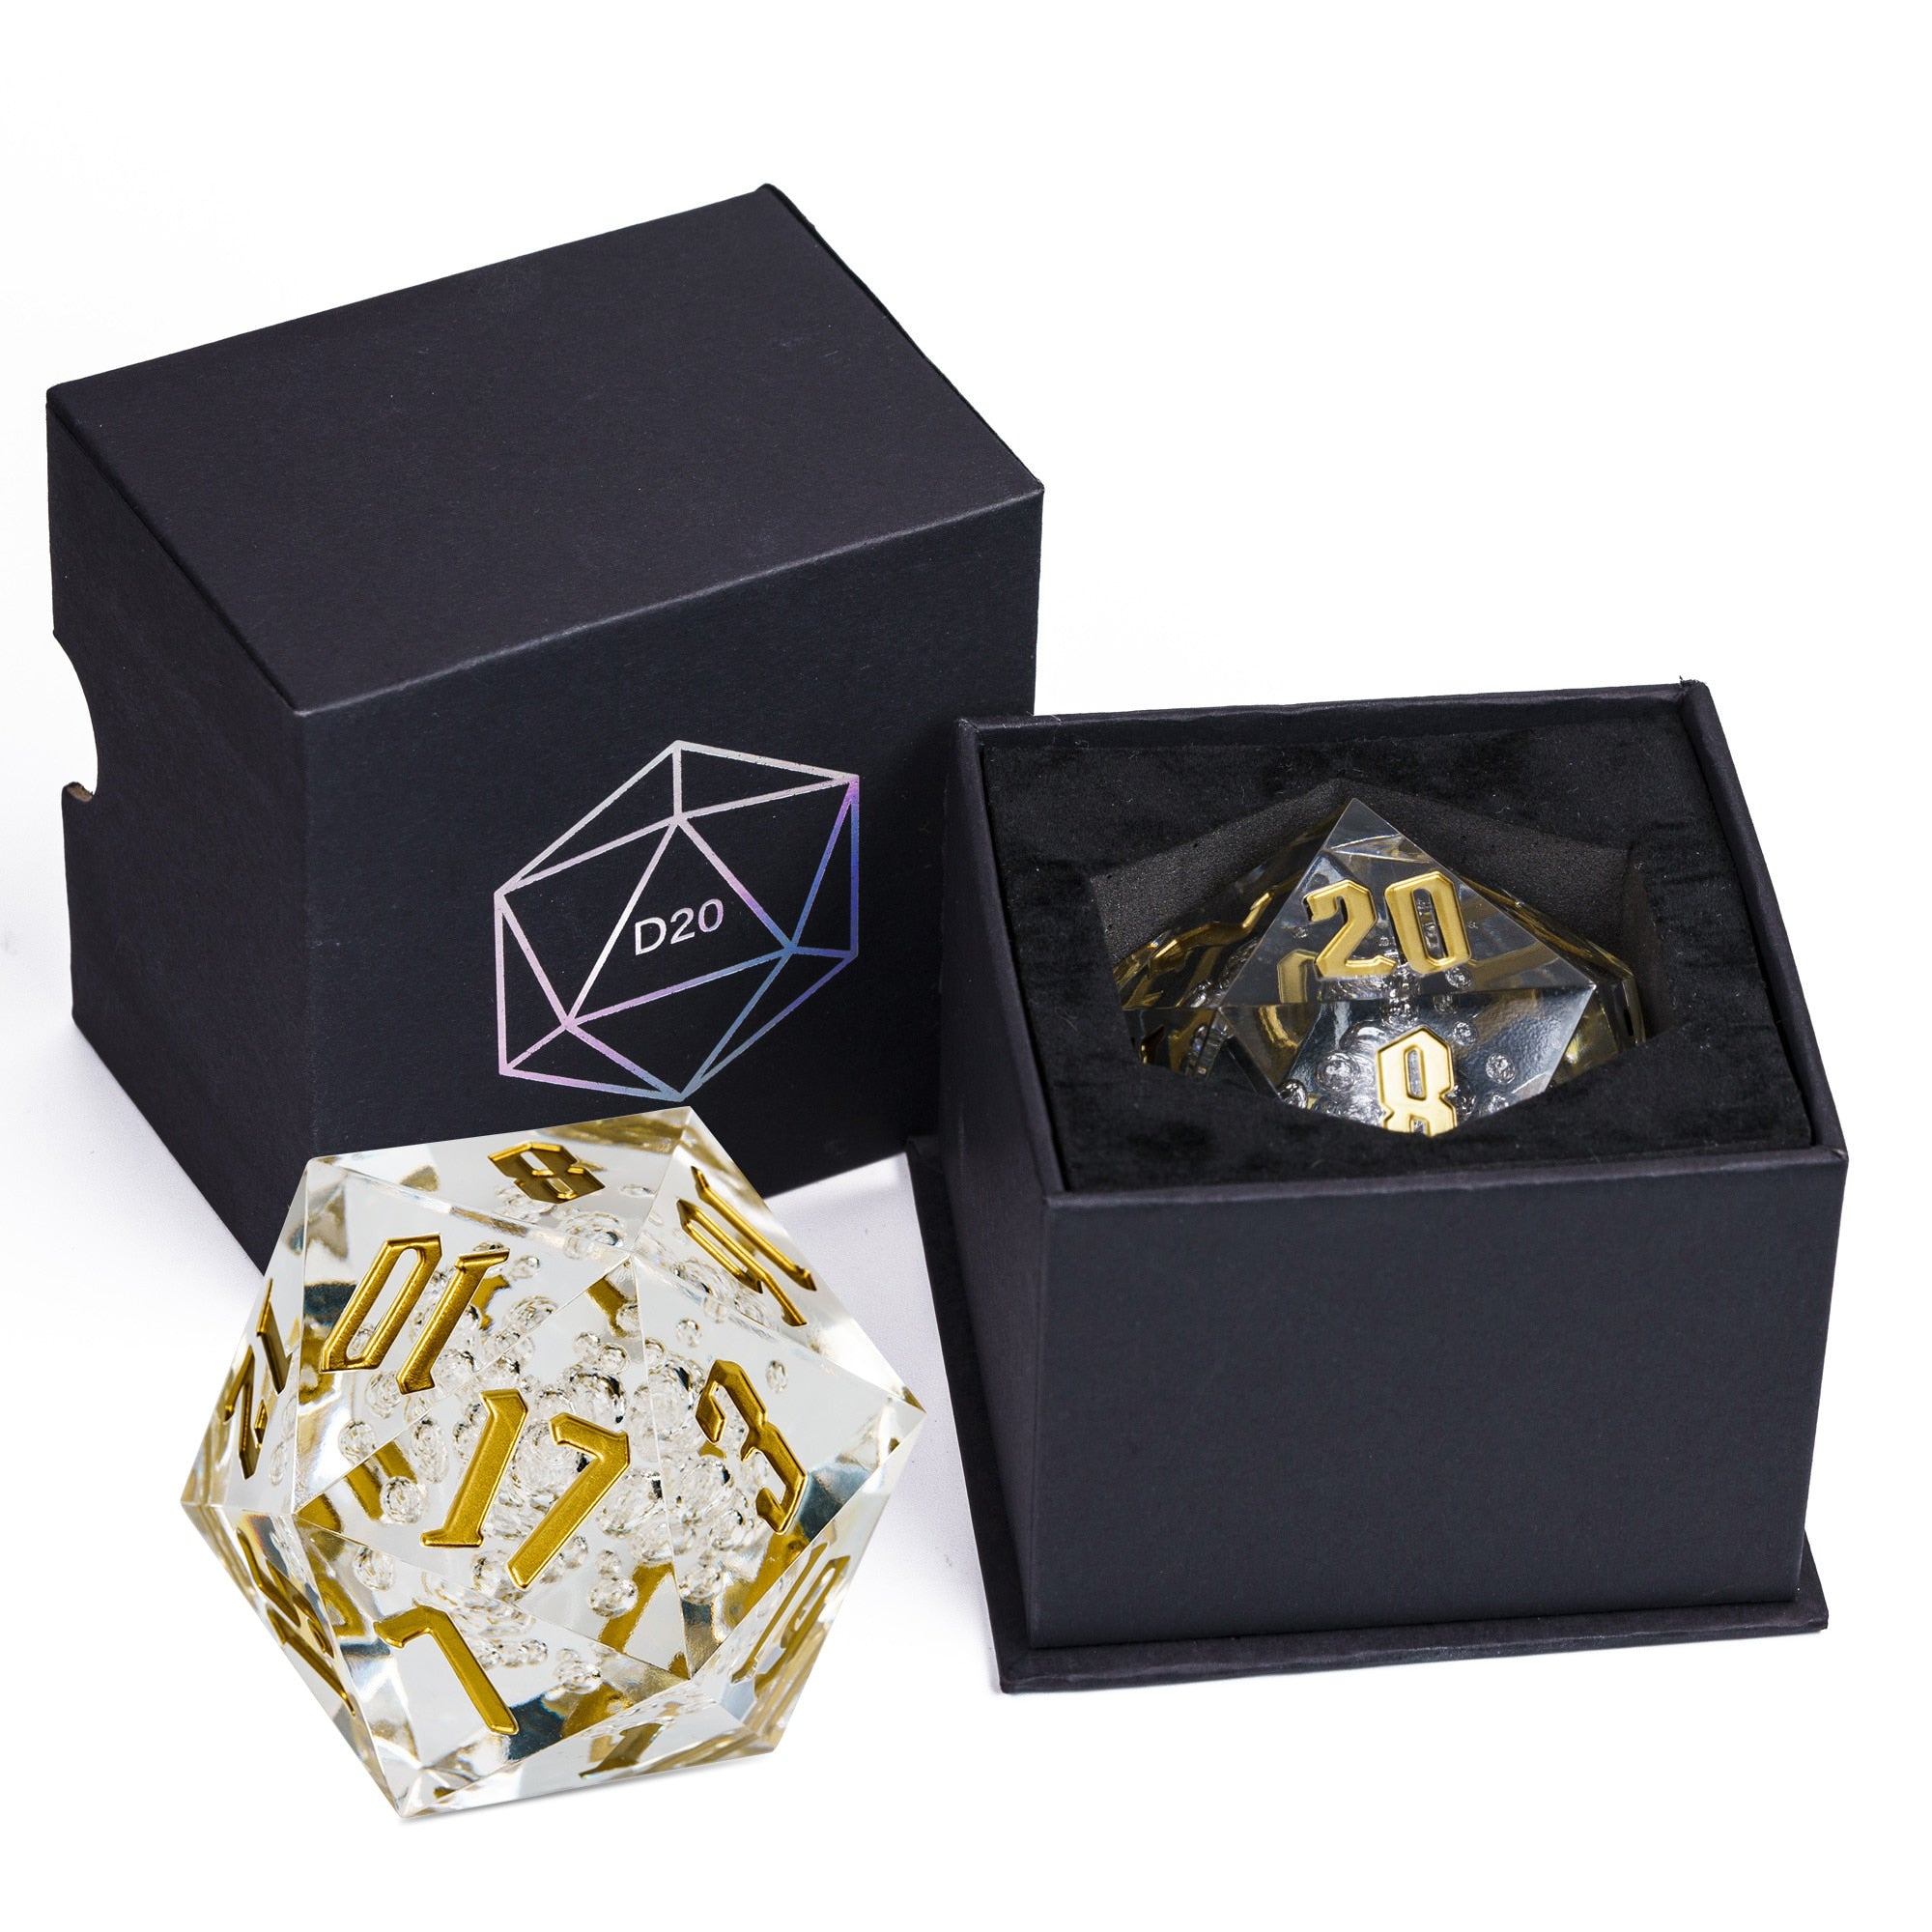 The Great D20 55mm Acrylic DND Polyhedral Dice